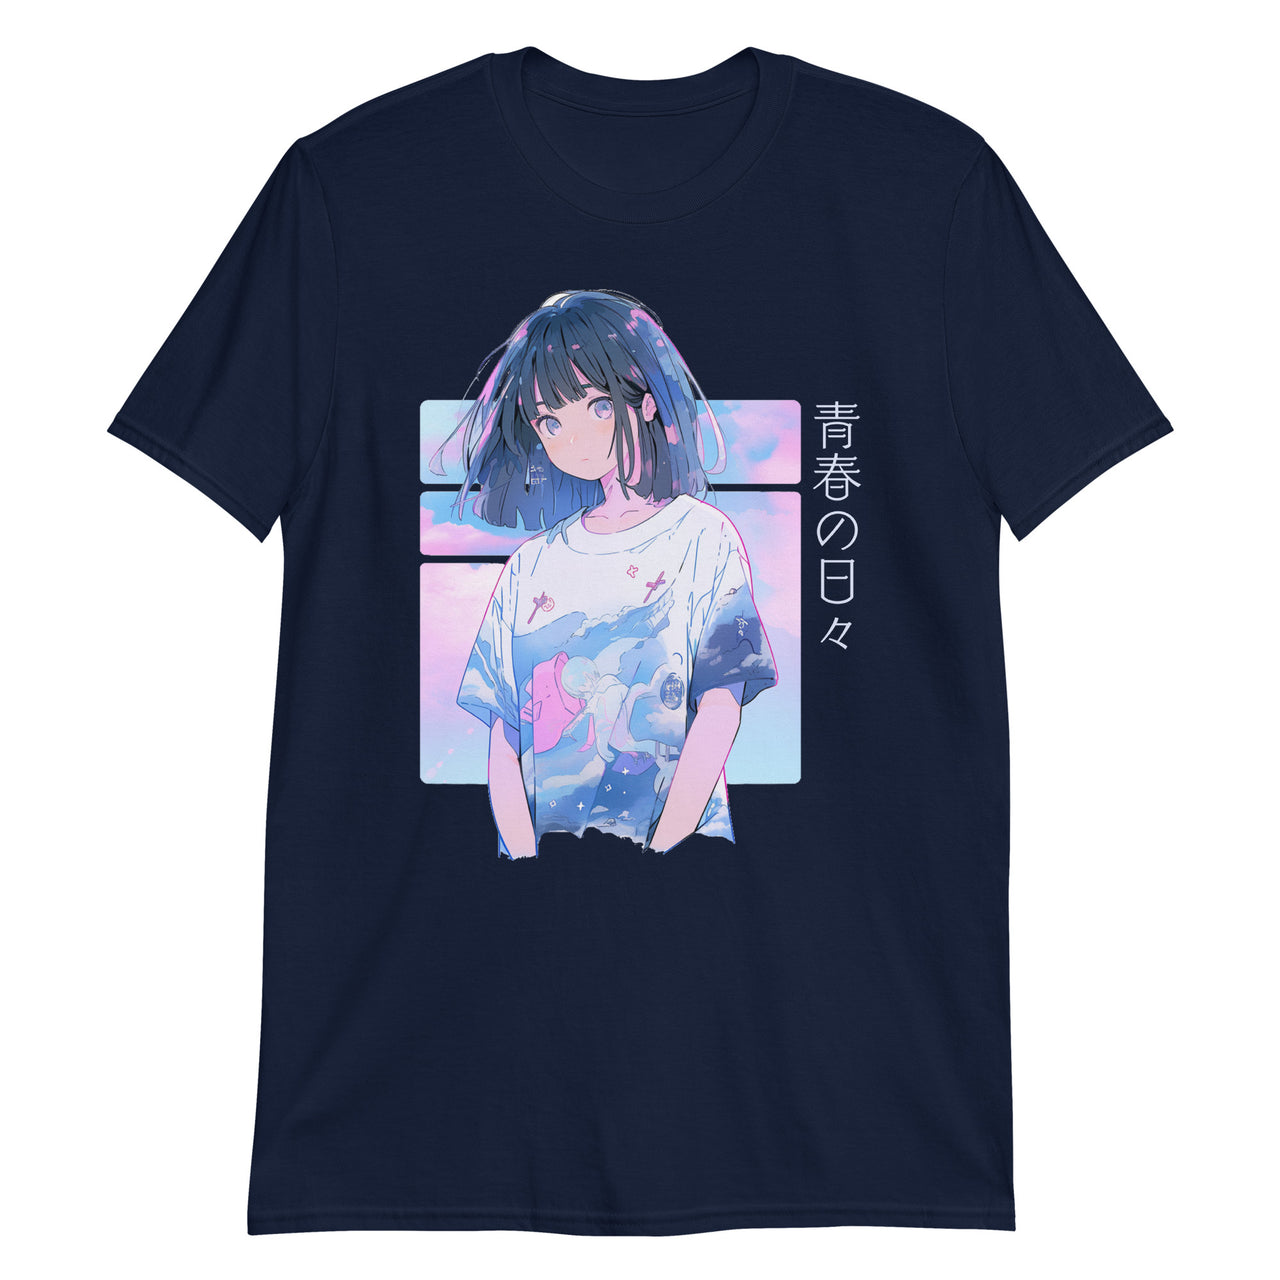 Youthful Days in Pastel Anime T-Shirt